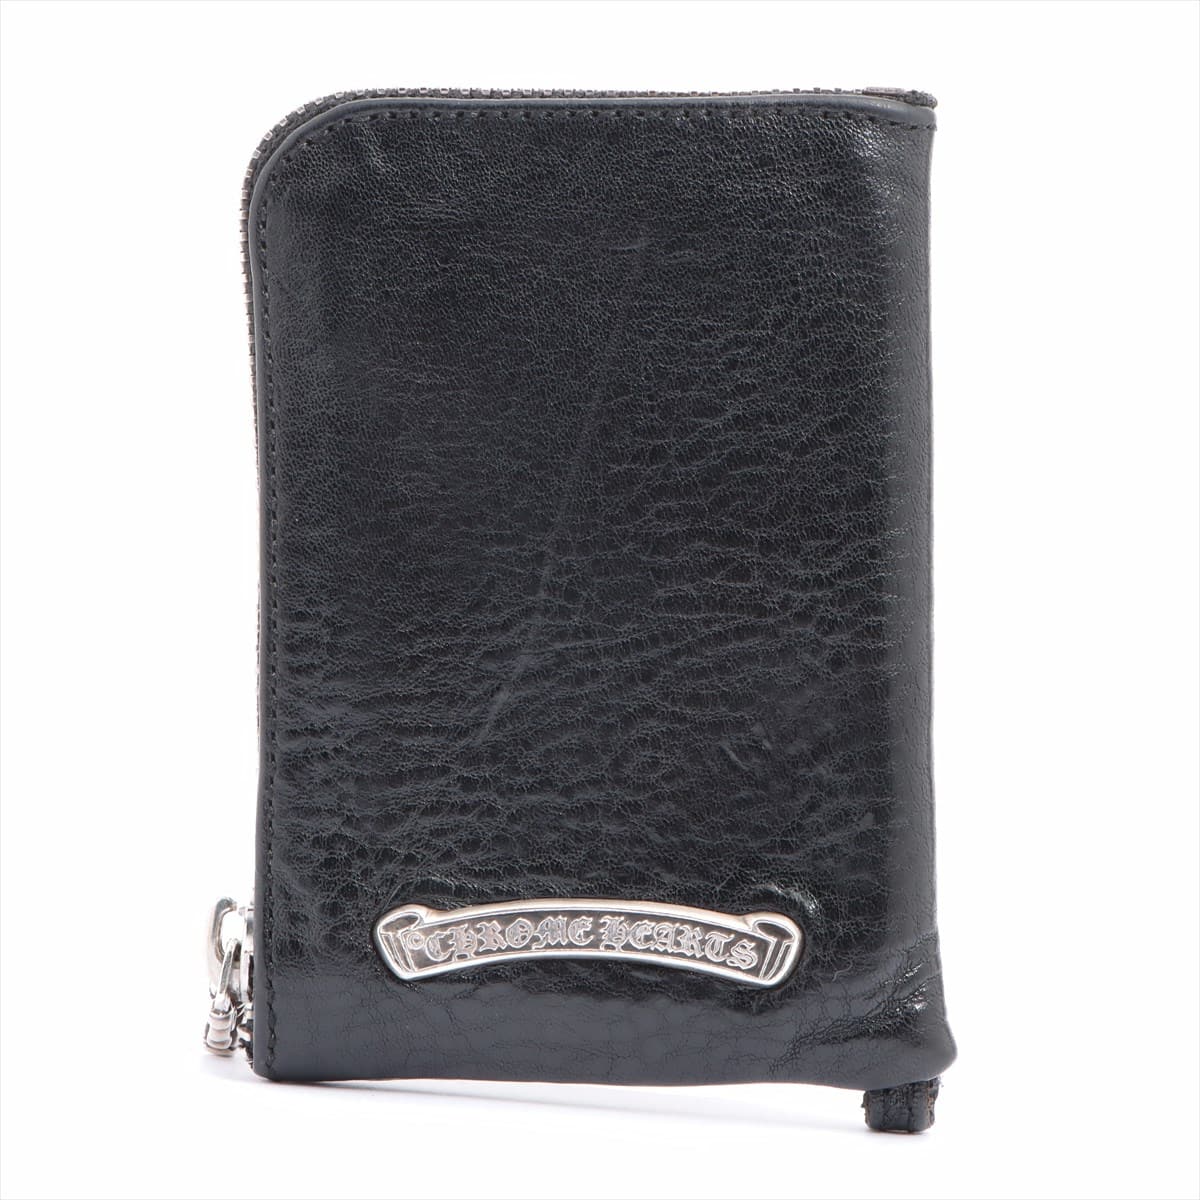 Chrome Hearts Zip Tiny Wallet Leather With invoice